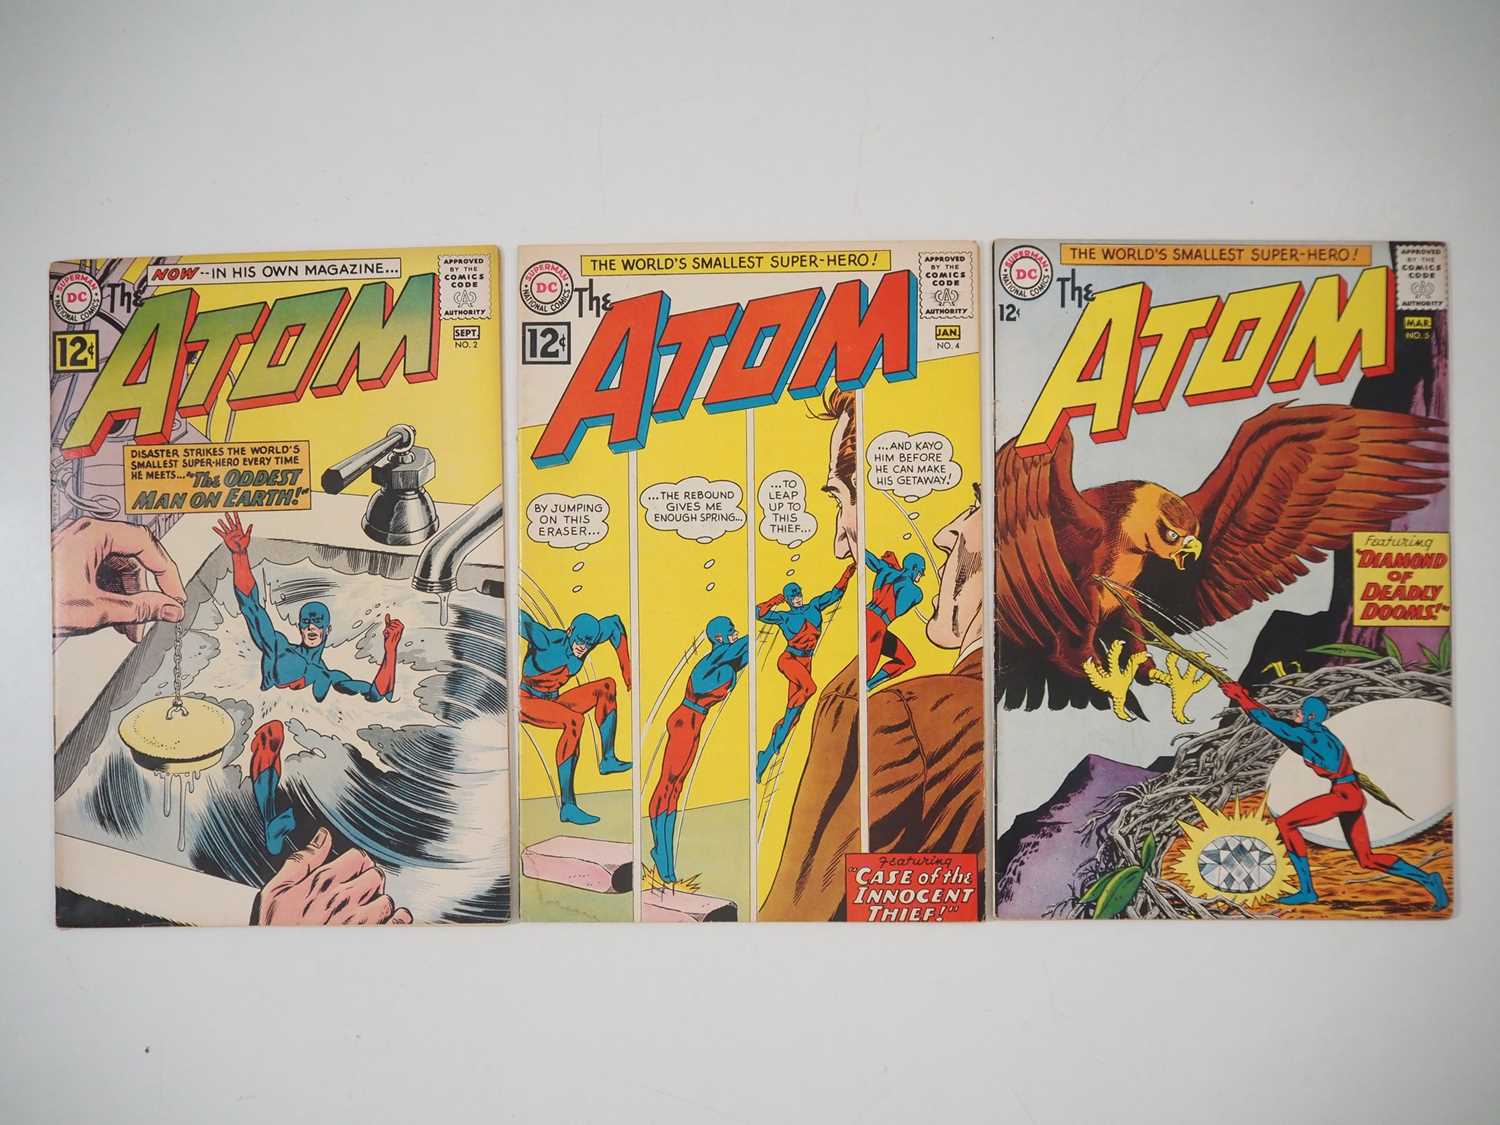 ATOM #2, 4, 5 (3 in Lot) - (1962/1963 - DC) - Includes "The Oddest Man on Earth!", "The Case of